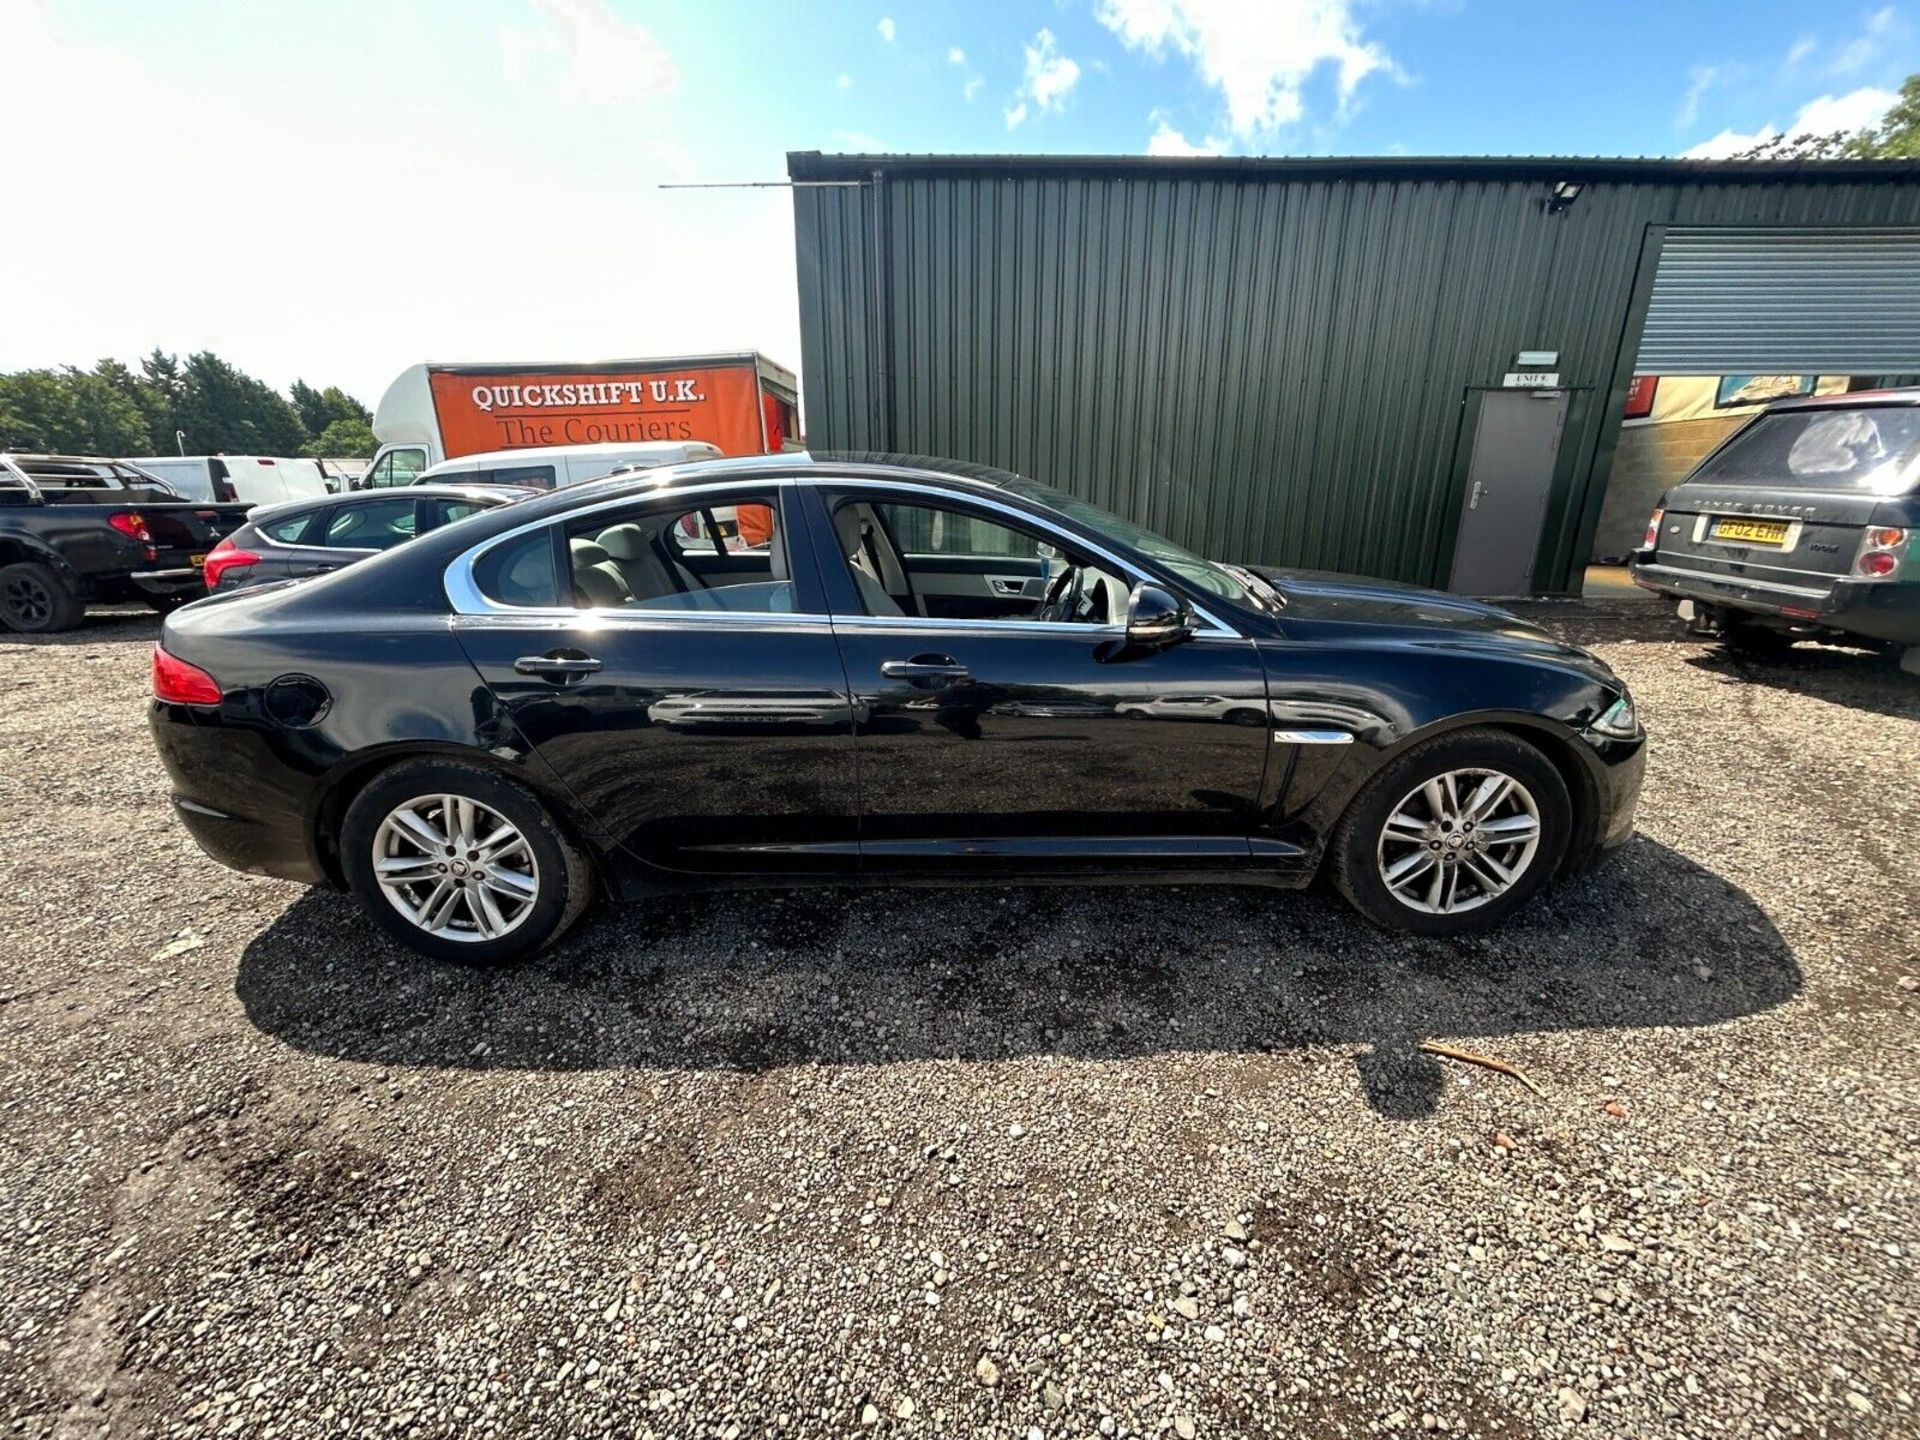 JAGUAR XF DIESEL SALOON 2.2D LUXURY 4DR AUTO 12 MONTHS MOT (NO VAT ON HAMMER) - IN DAILY USE - Image 2 of 19